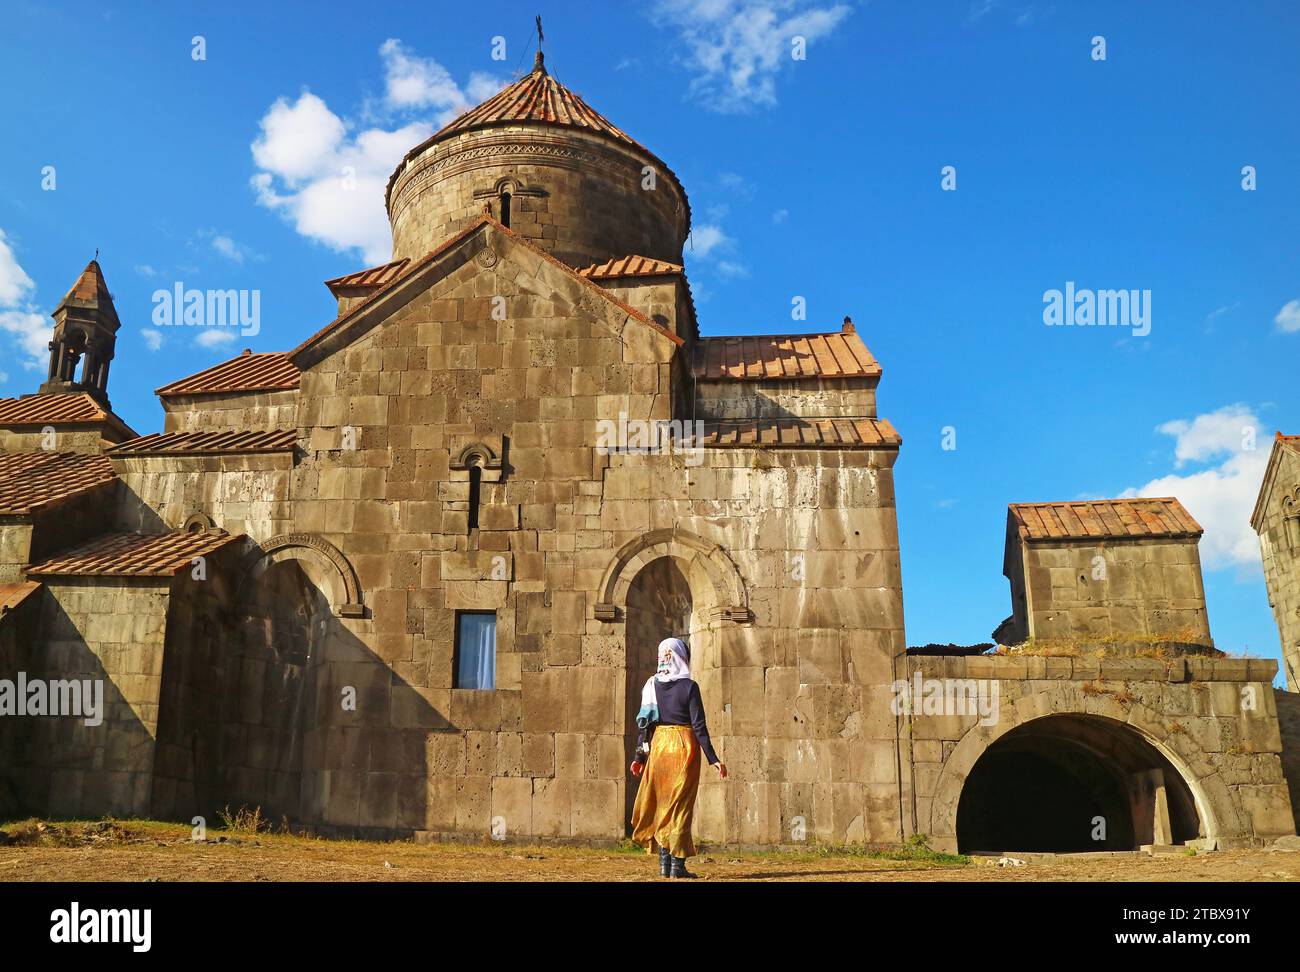 Ancient Monastery Complex of Haghpat or Haghpatavank, UNESCO World Heritage Site in Lori Province of Armenia Stock Photo